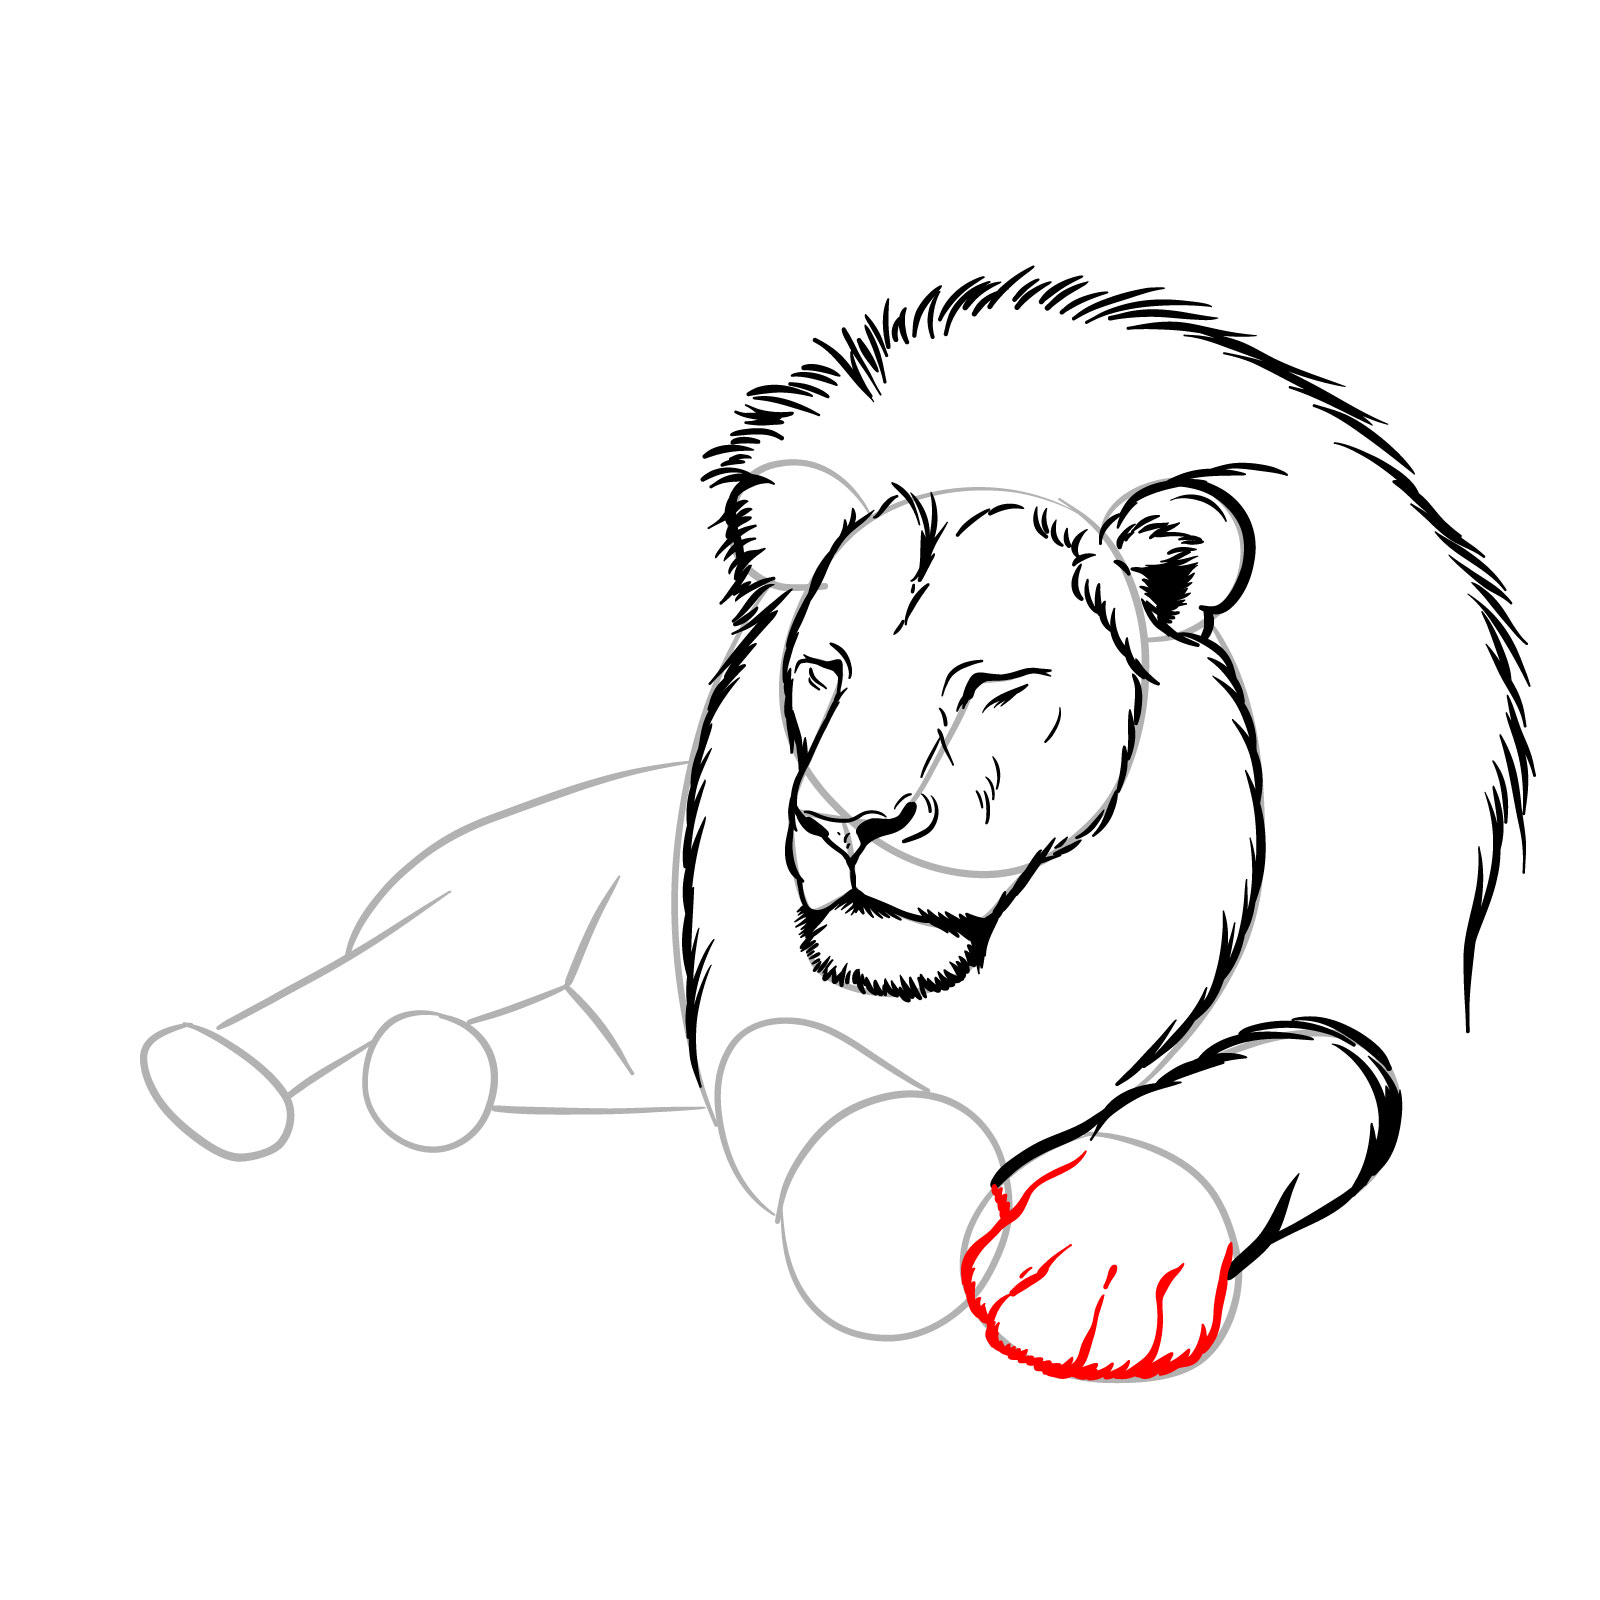 How to draw a sleeping lion in front view - Step 9: Adding toes to the front leg